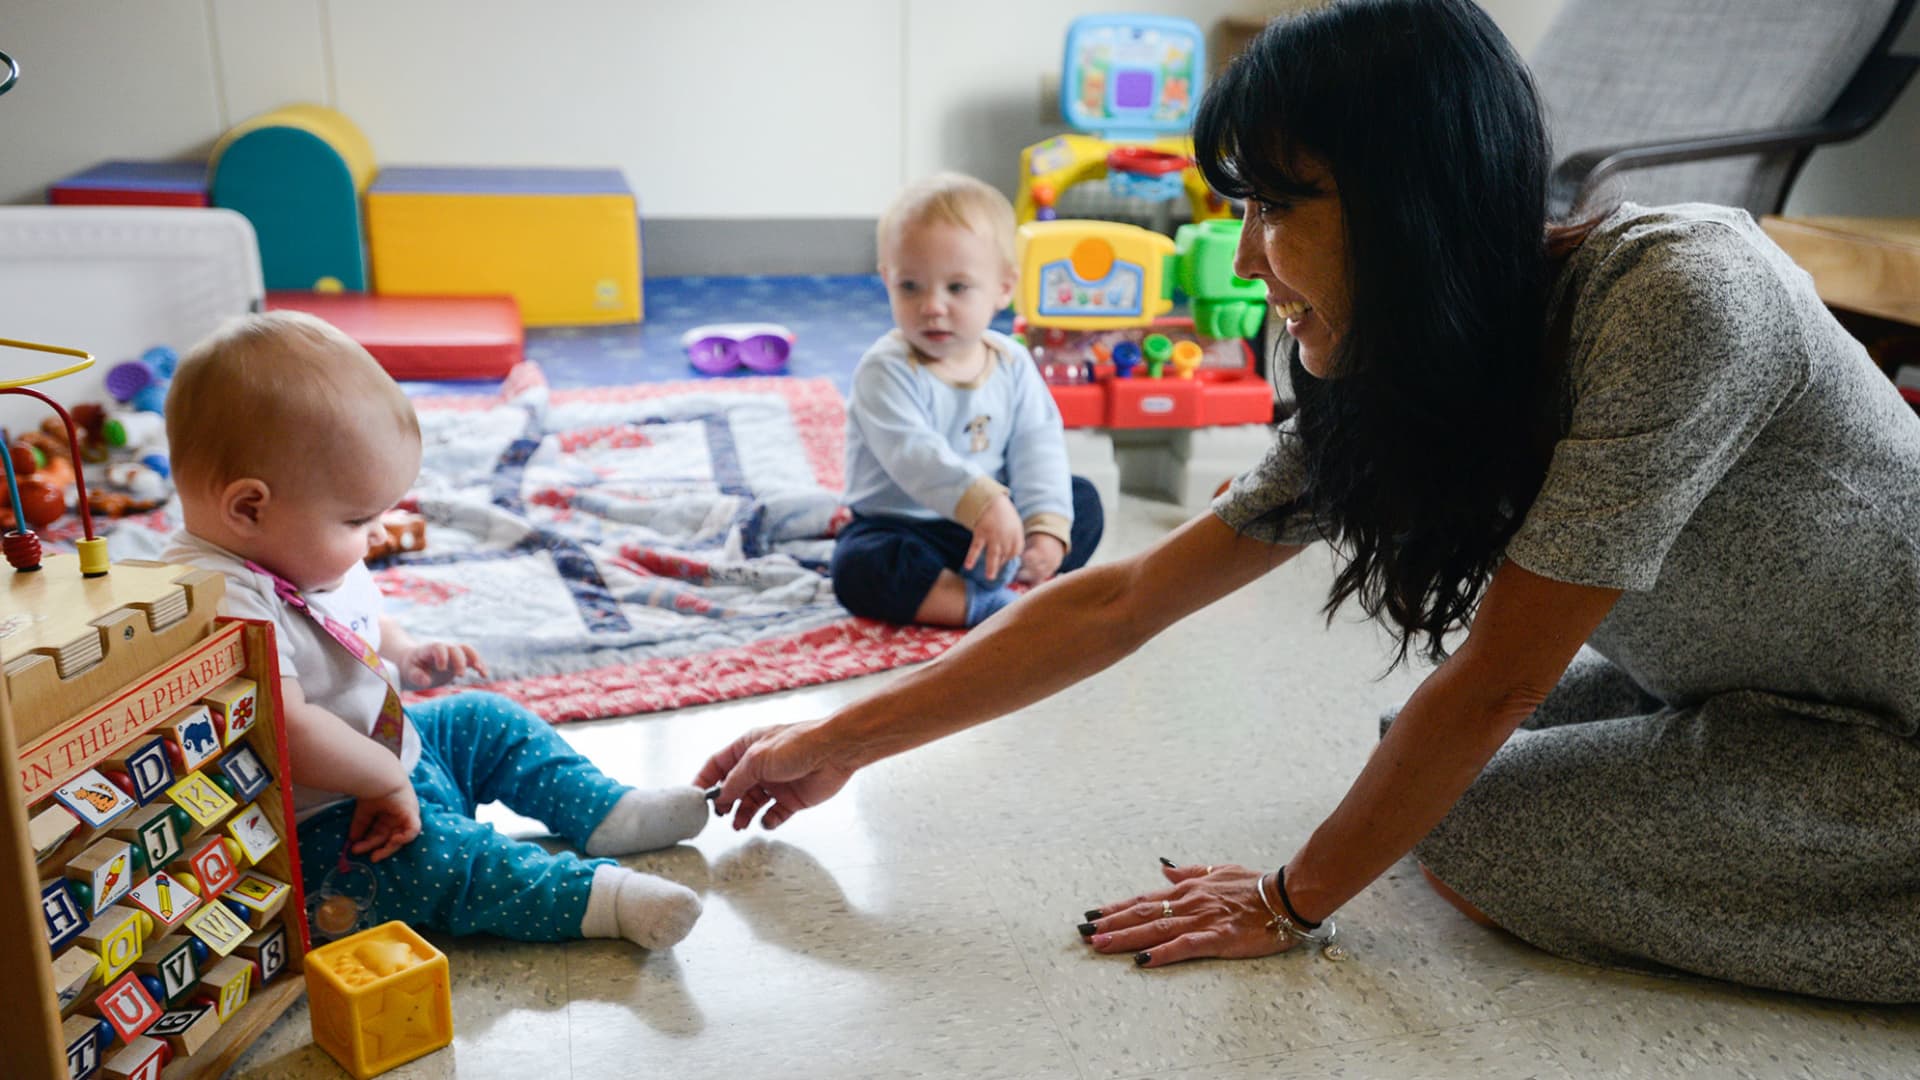 Majority of parents spend 20% or more of household income on child care, report finds